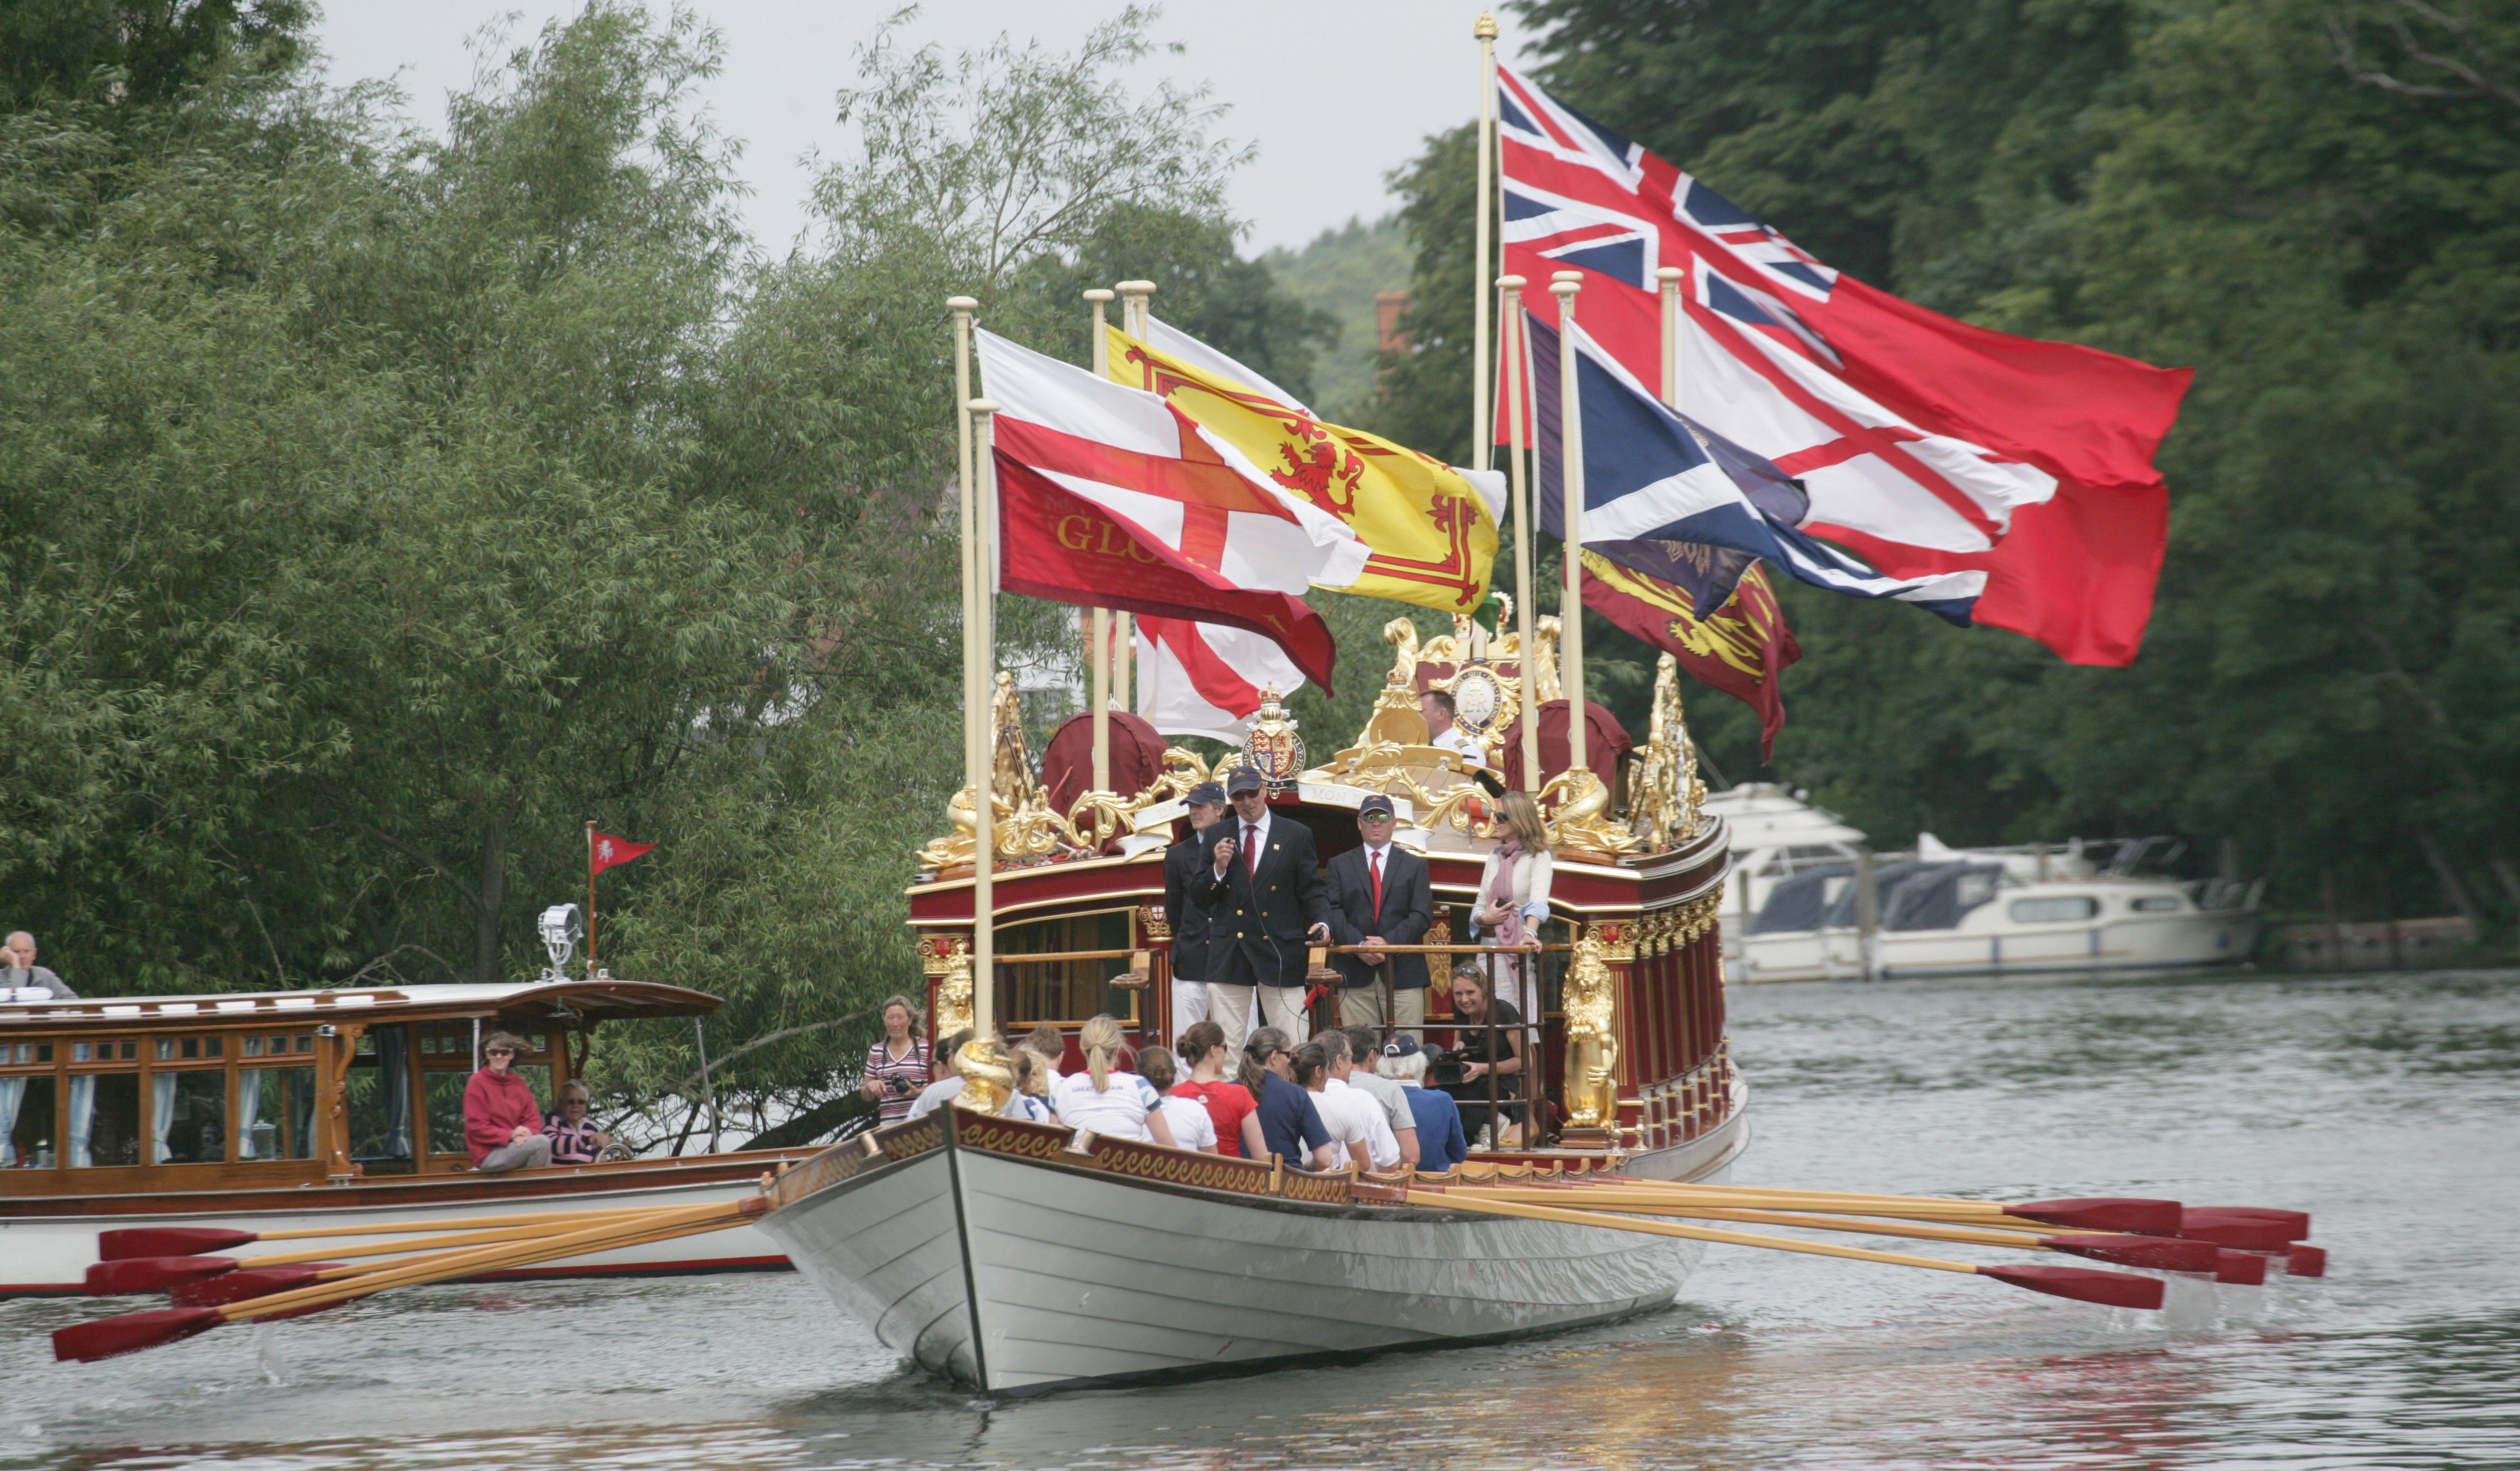 Kingston business could benefit from mooring of Queen’s barge